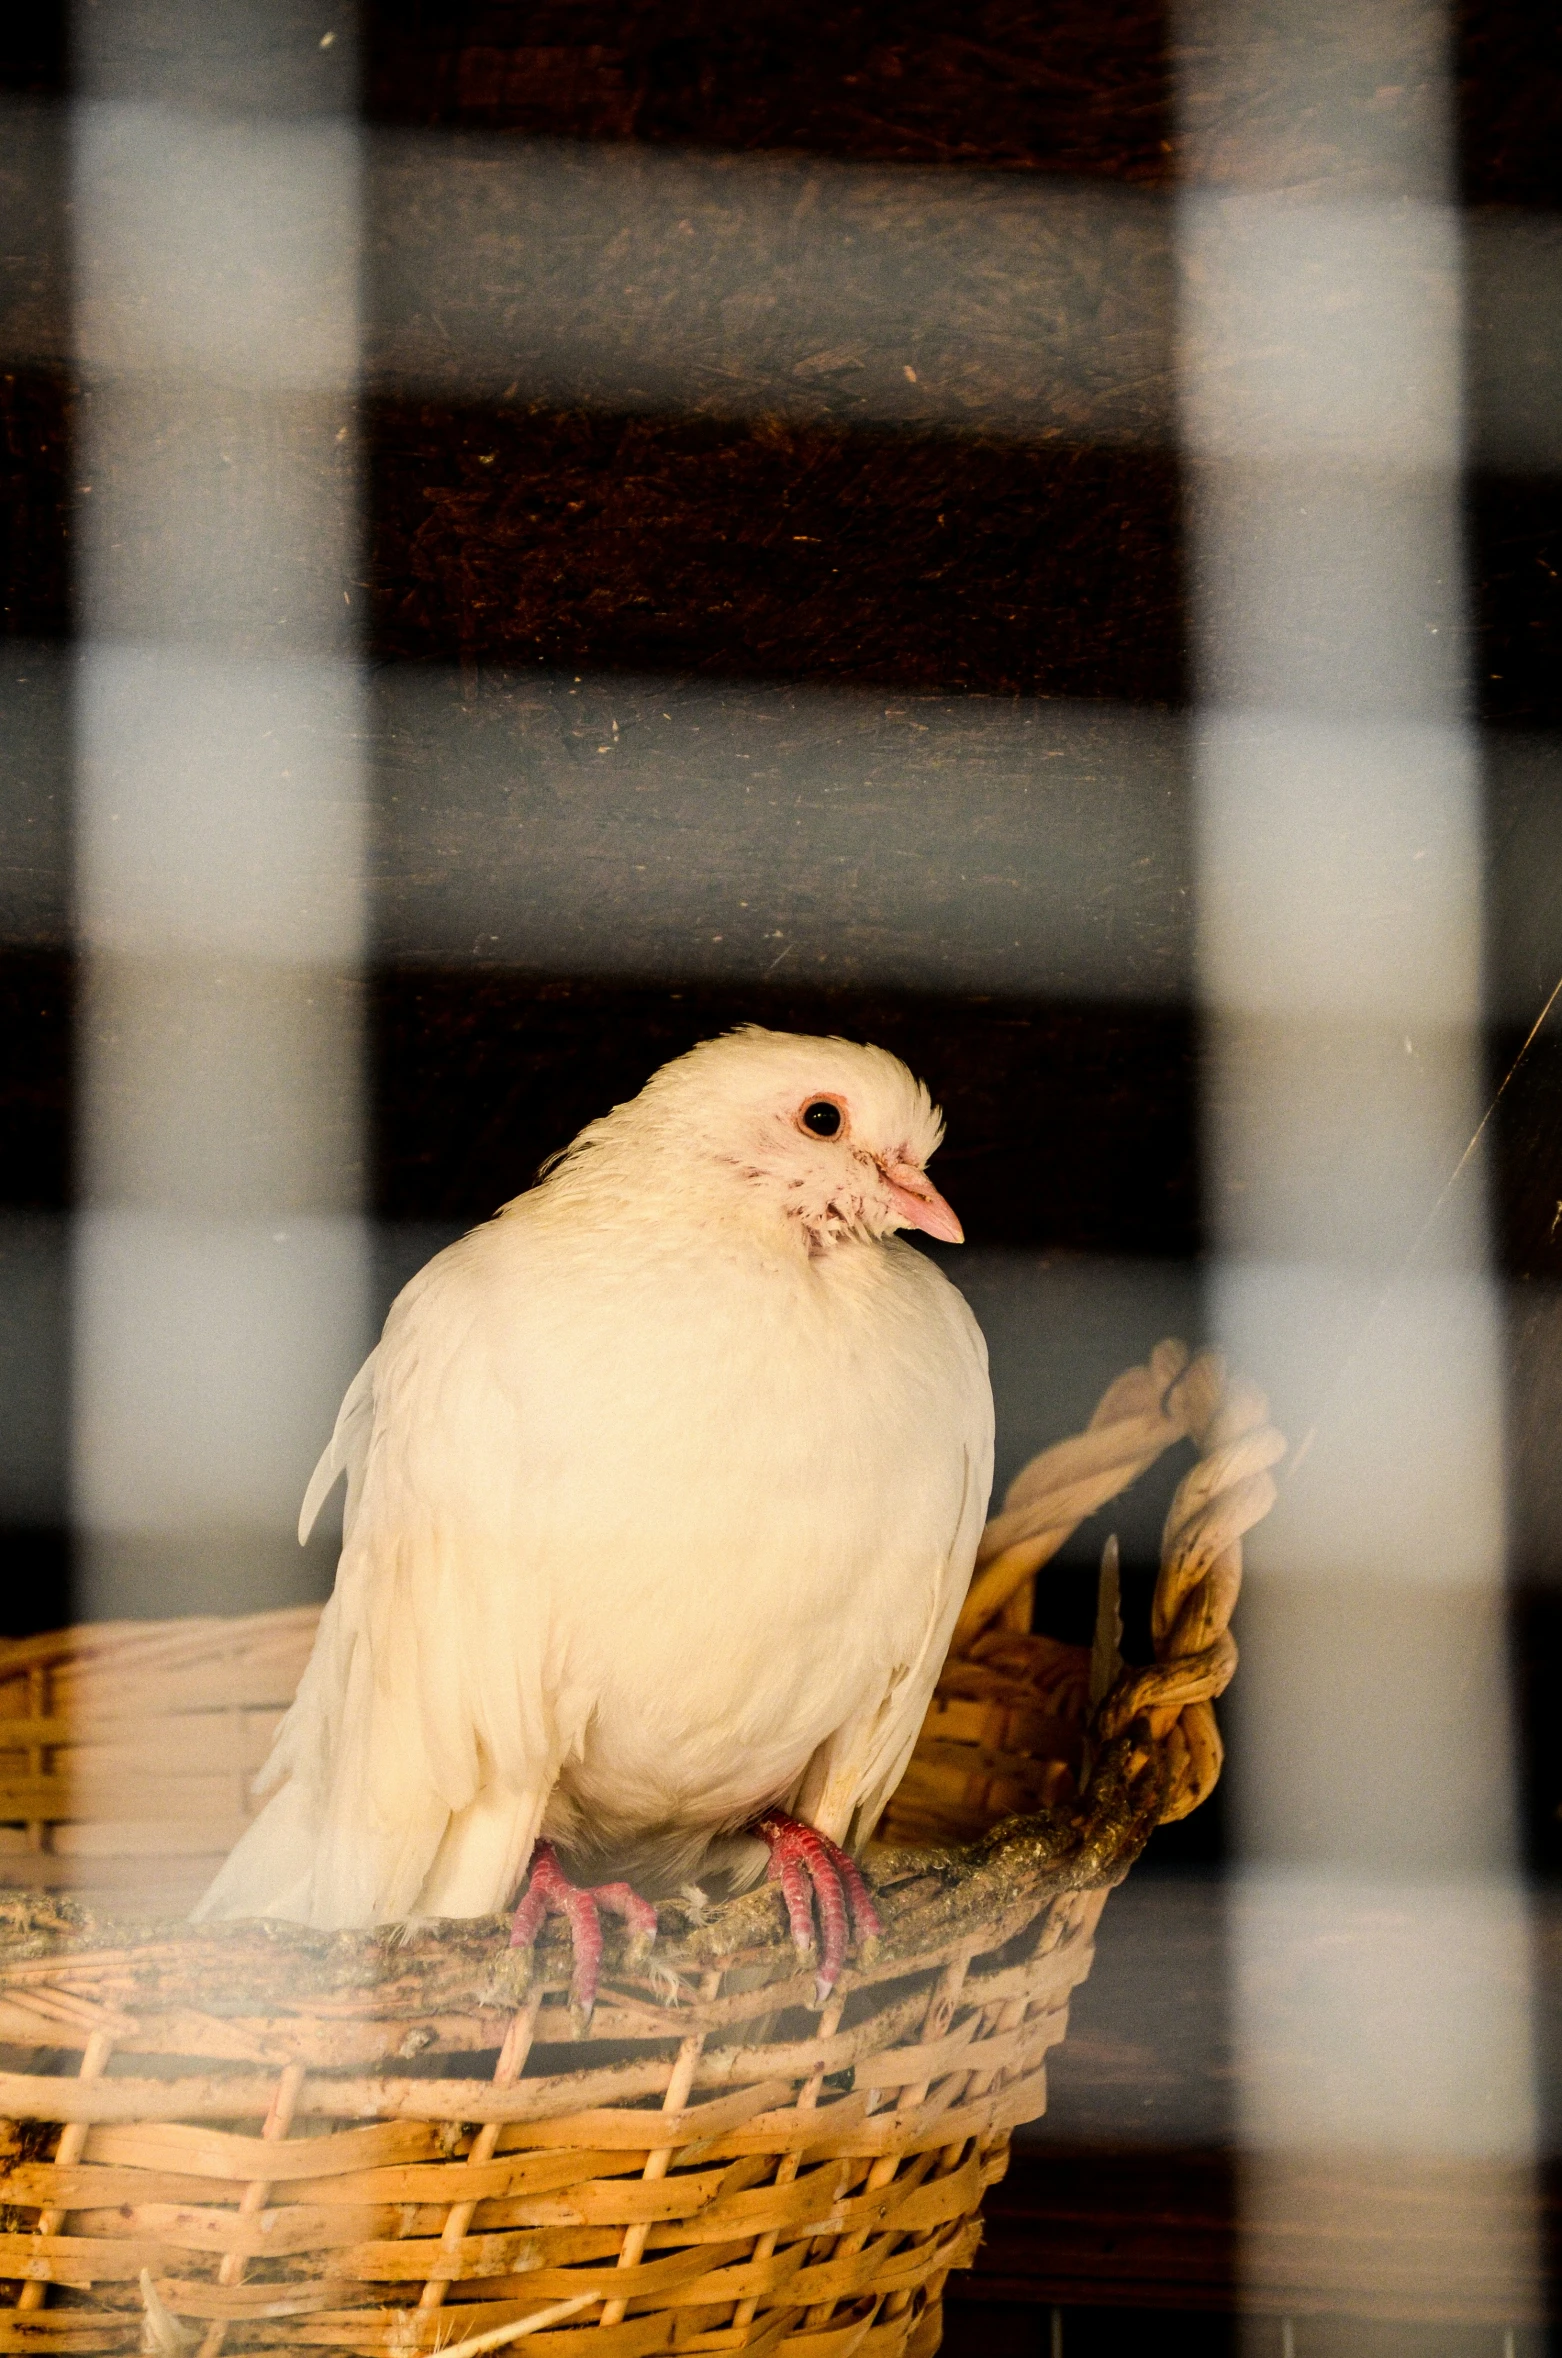 a white bird sitting on top of a yellow basket